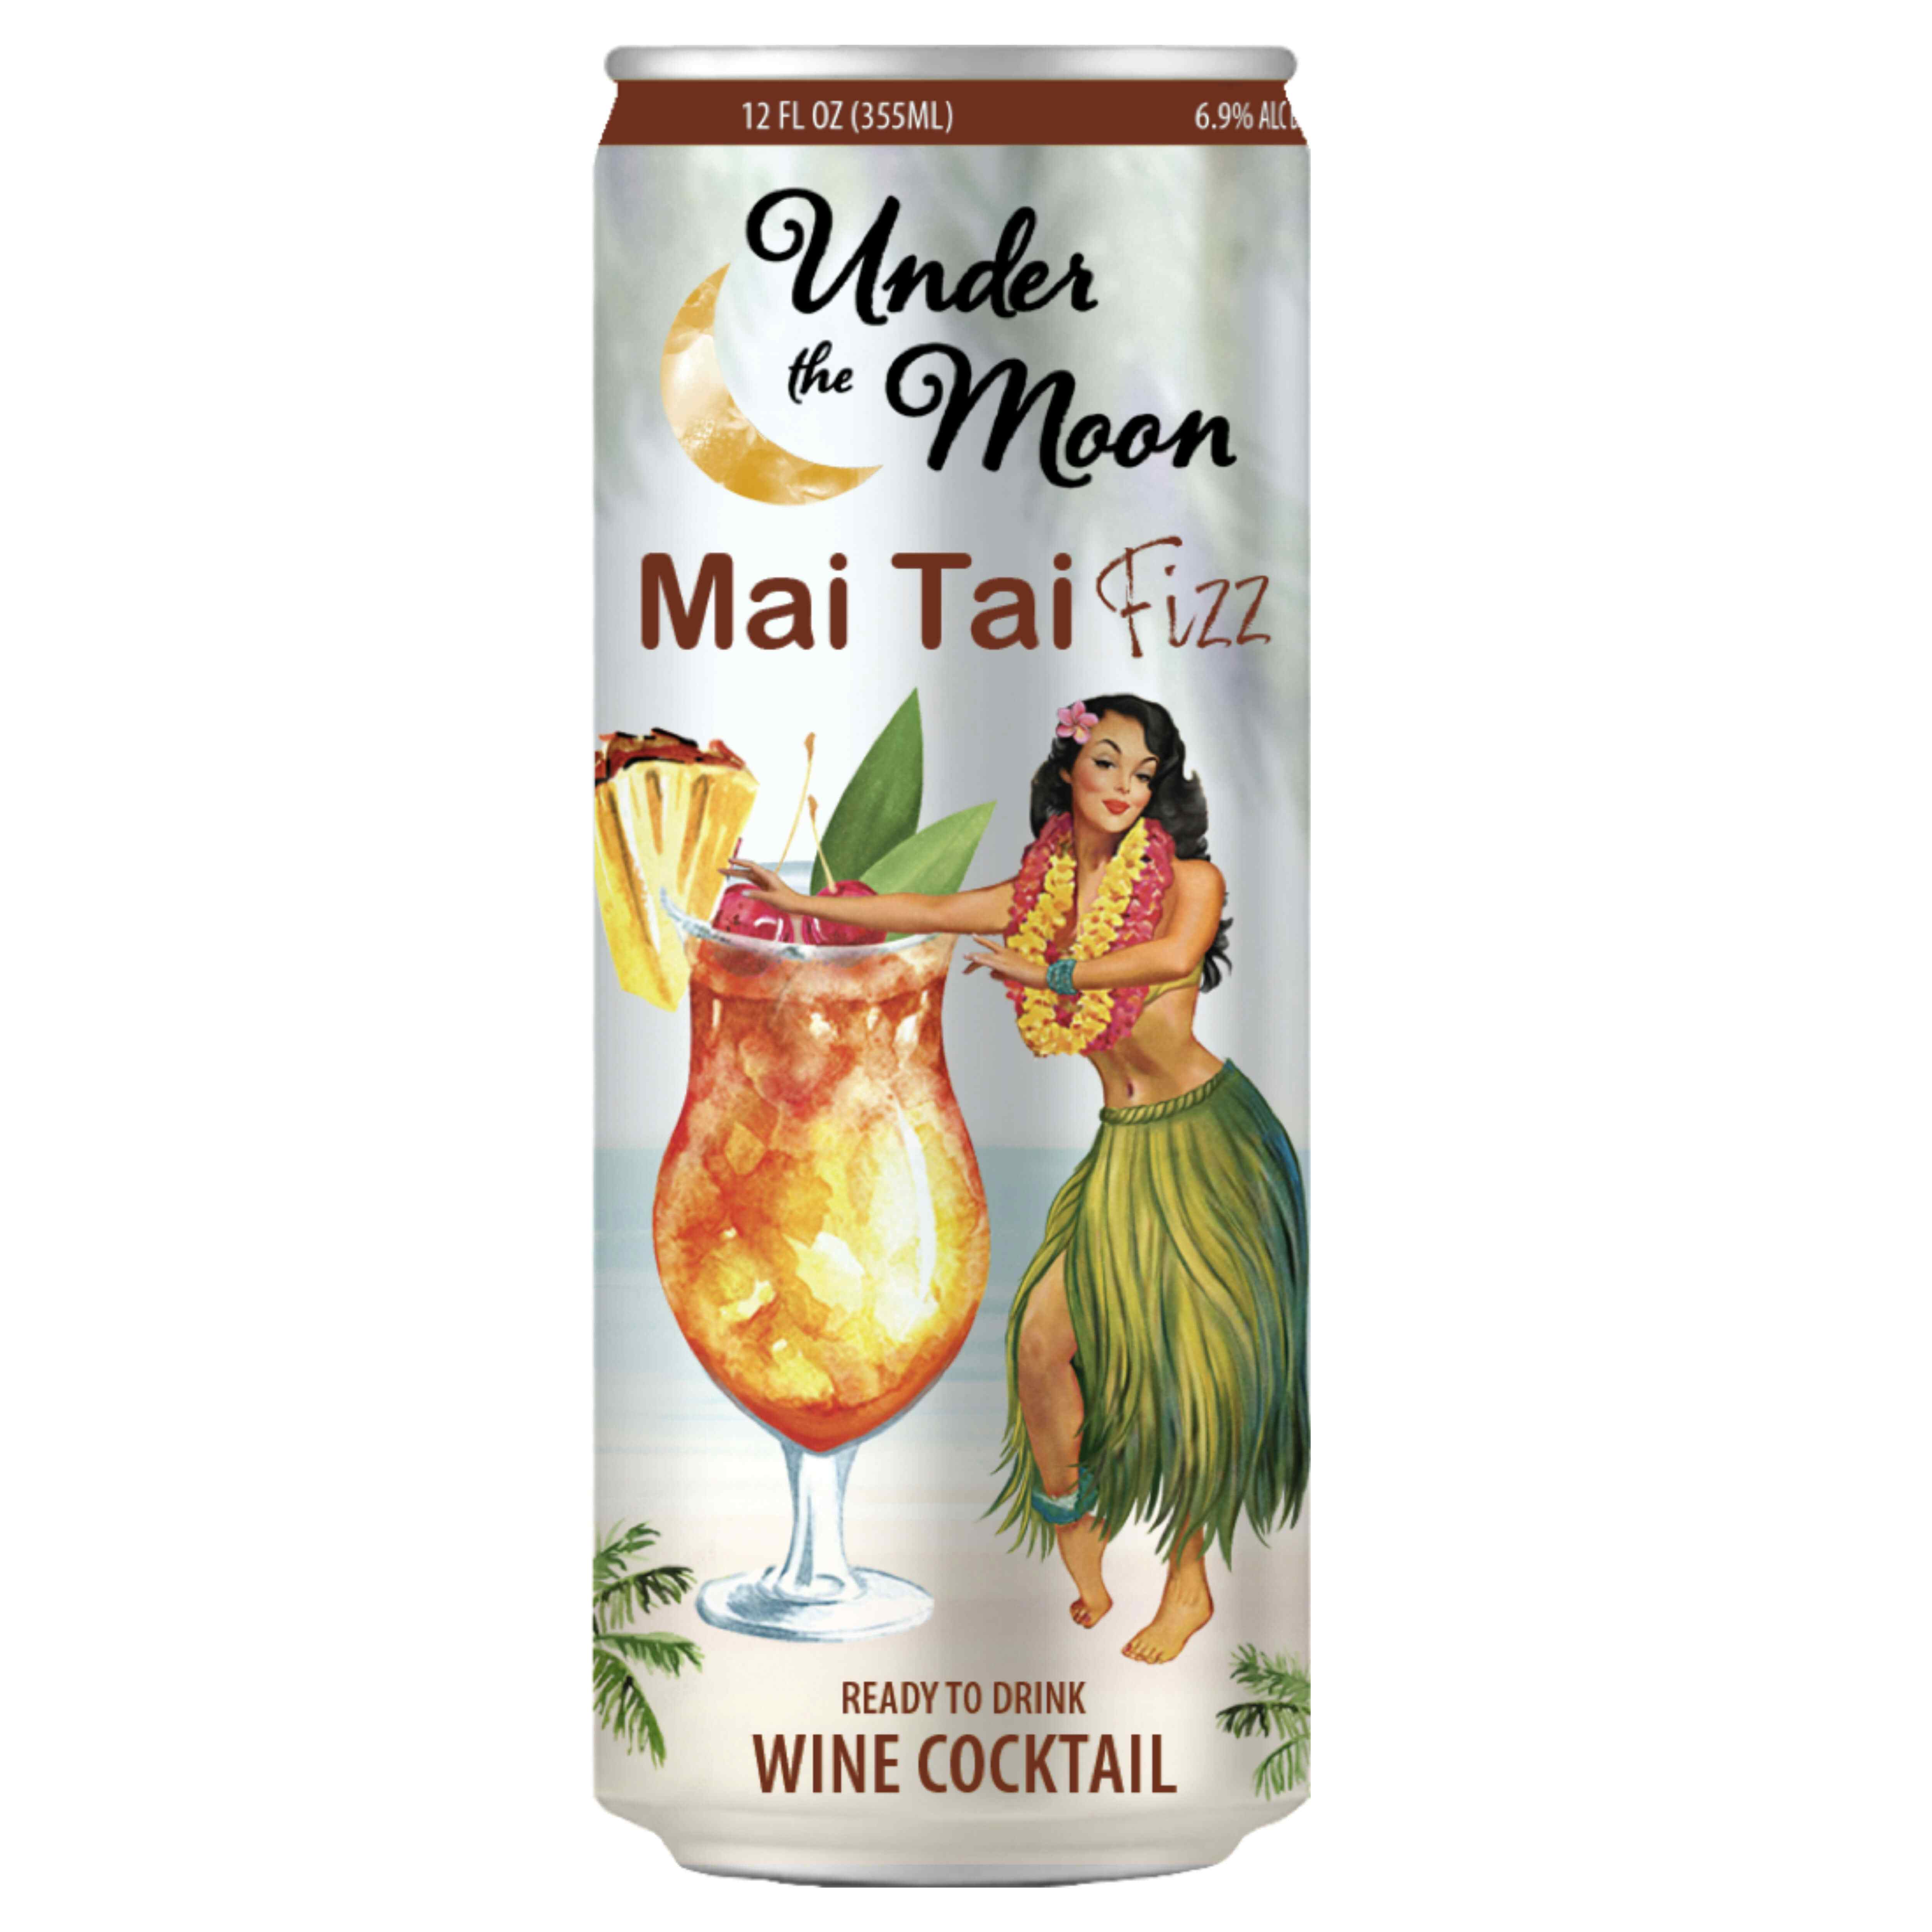 Under The Moon Mai Tai Cocktail Ready to Drink